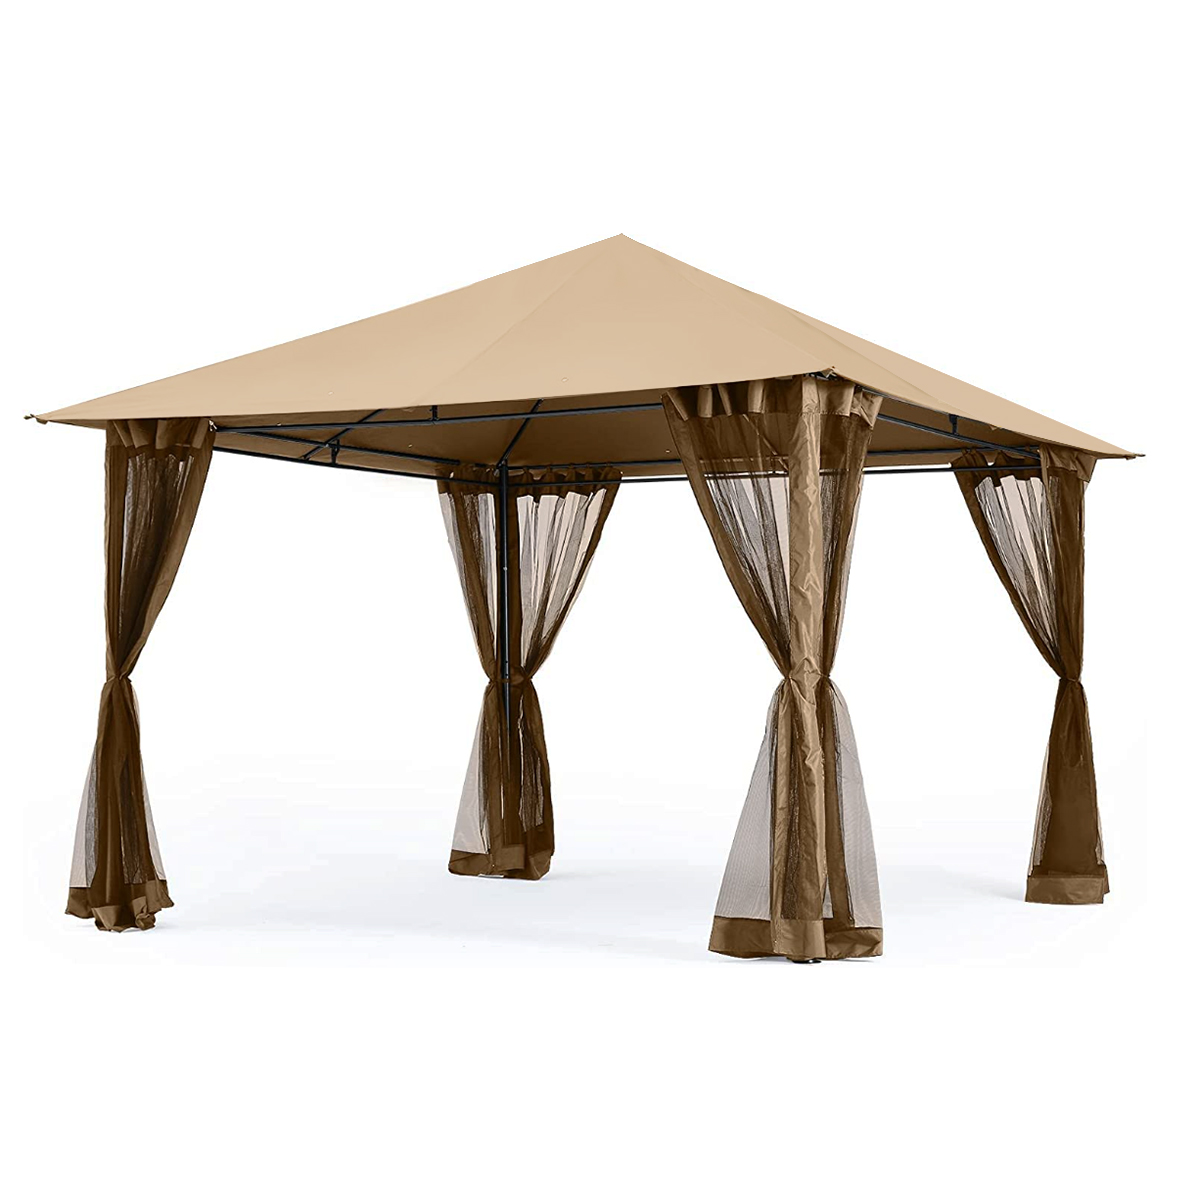 Replacement Canopy for MasterCanopy Single Tier 10' x 10' Gazebo